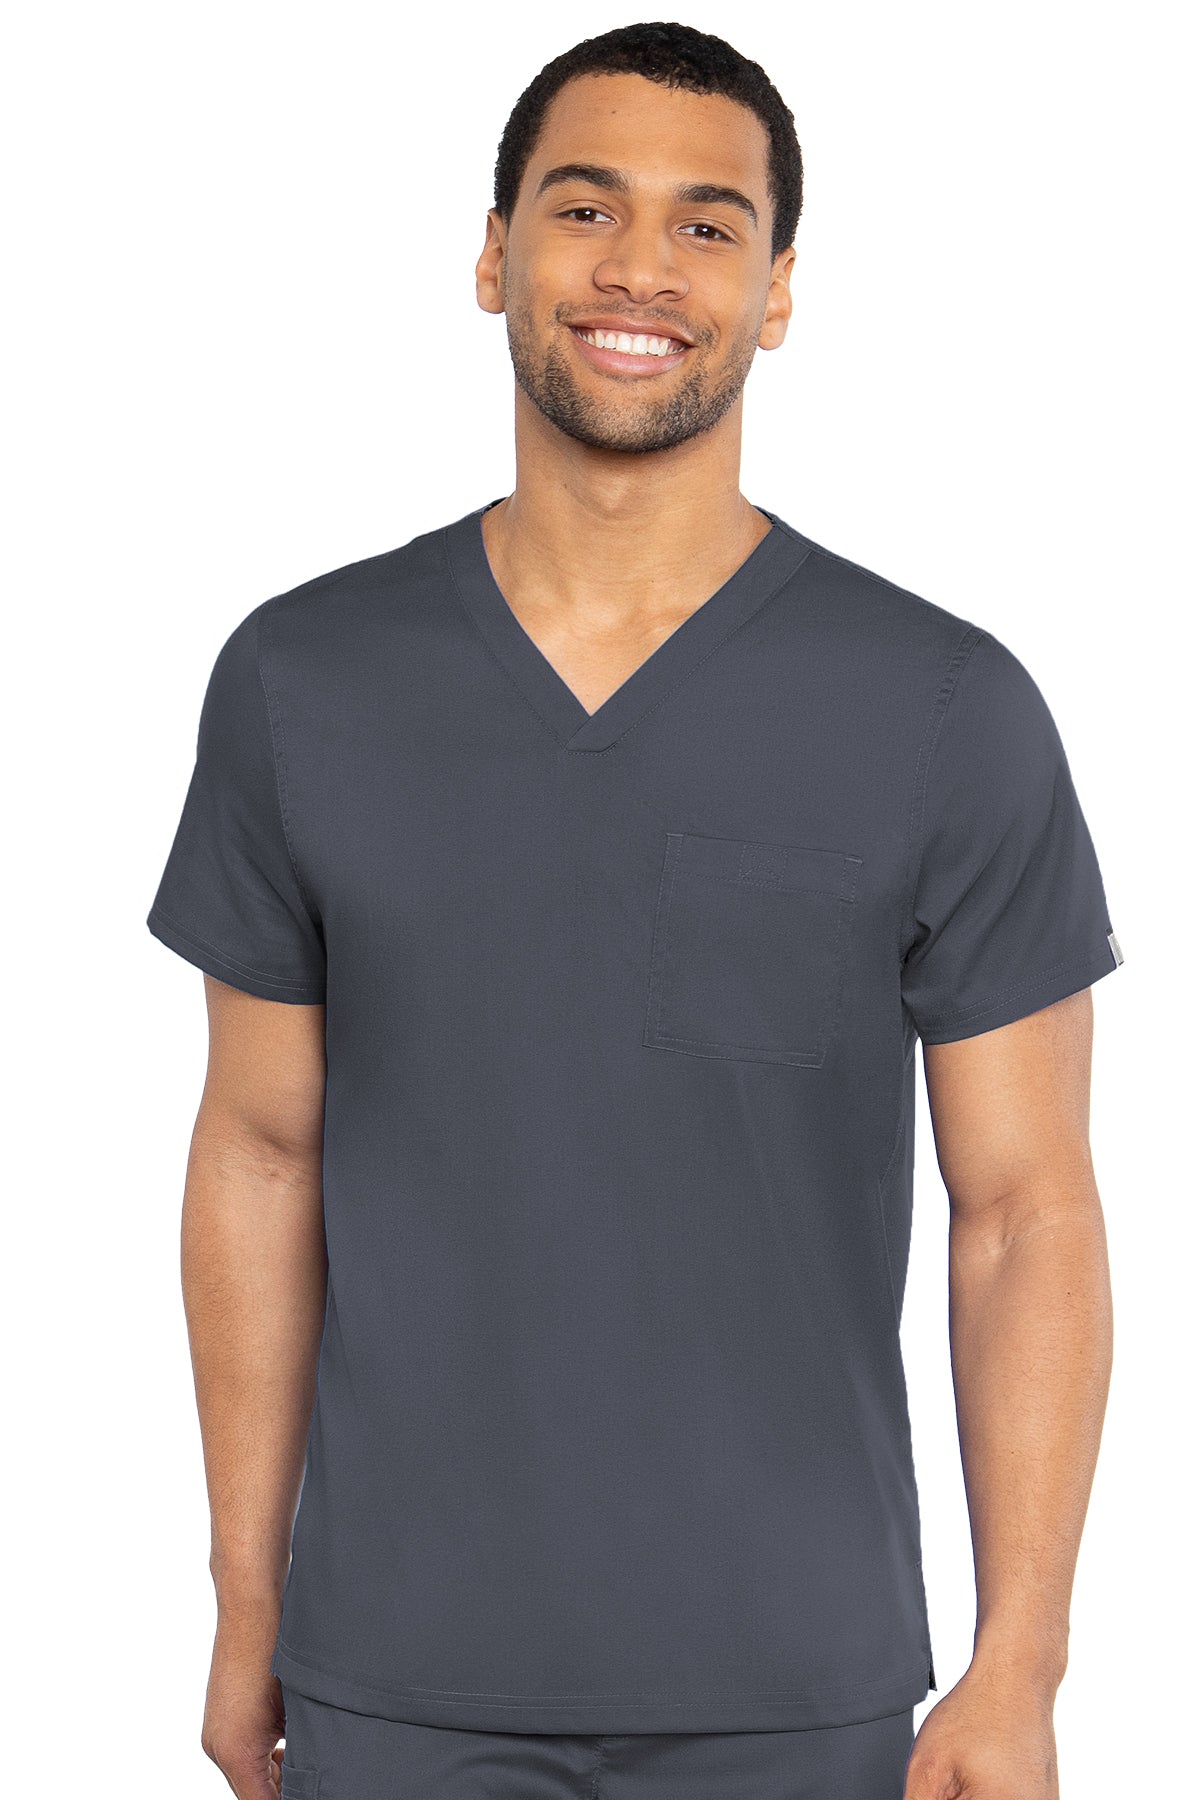 Cadence One Pocket Top by  Rothwear XS-3XL / Pewter